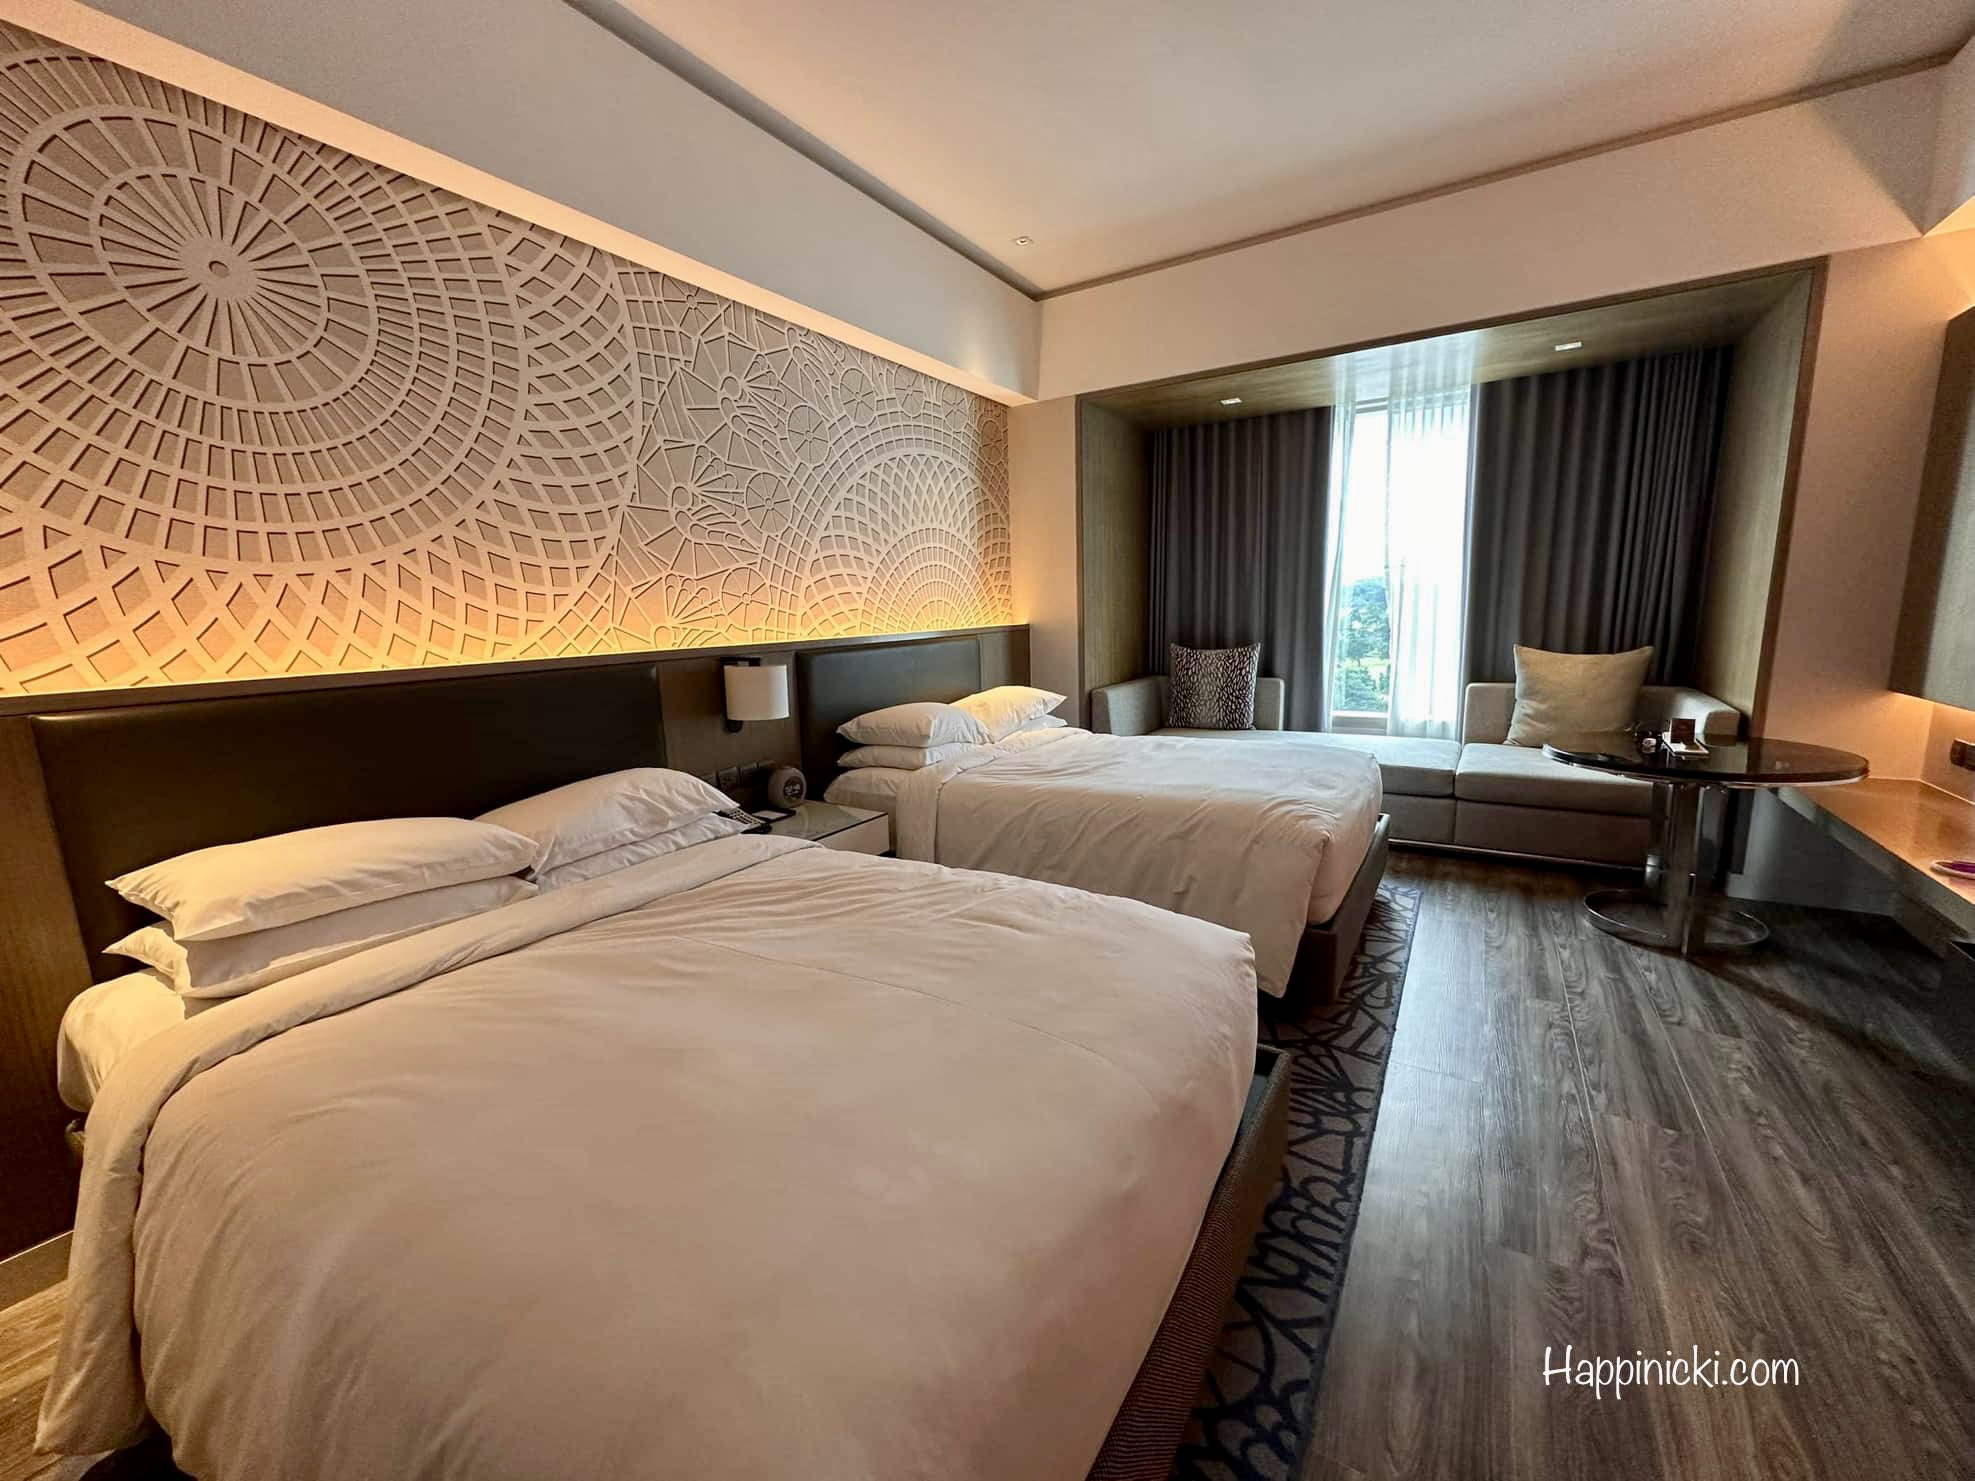 Clark Marriott Hotel Part 1: Certified One of the Best Hotels in the Philippines